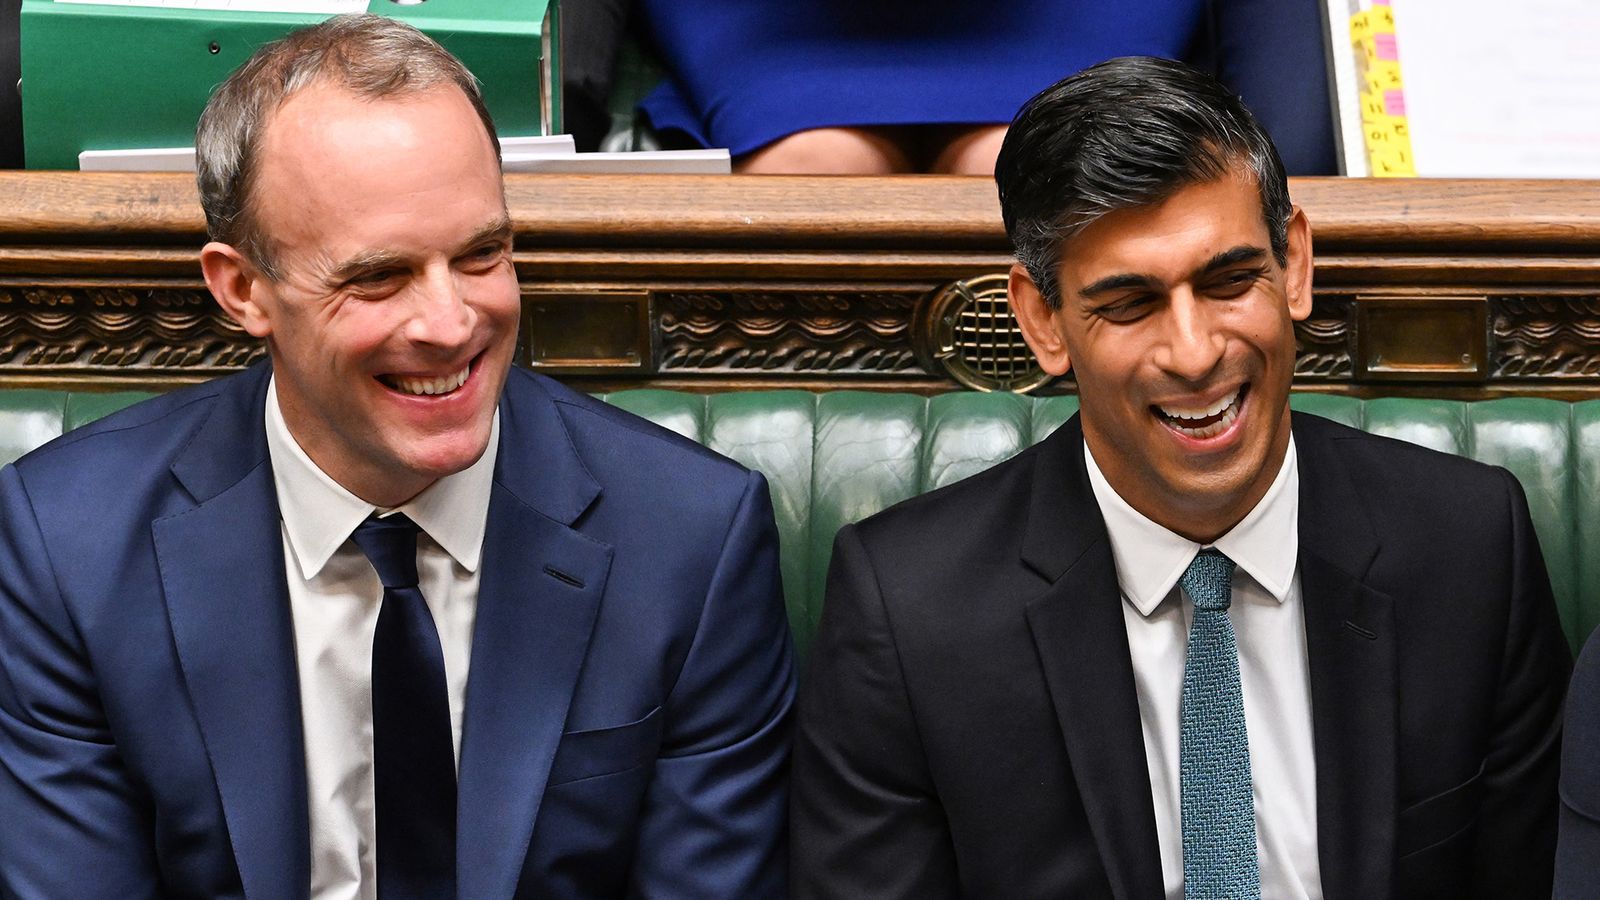 Dominic Raab's fate in Rishi Sunak's hands after long-awaited bullying claims report concludes